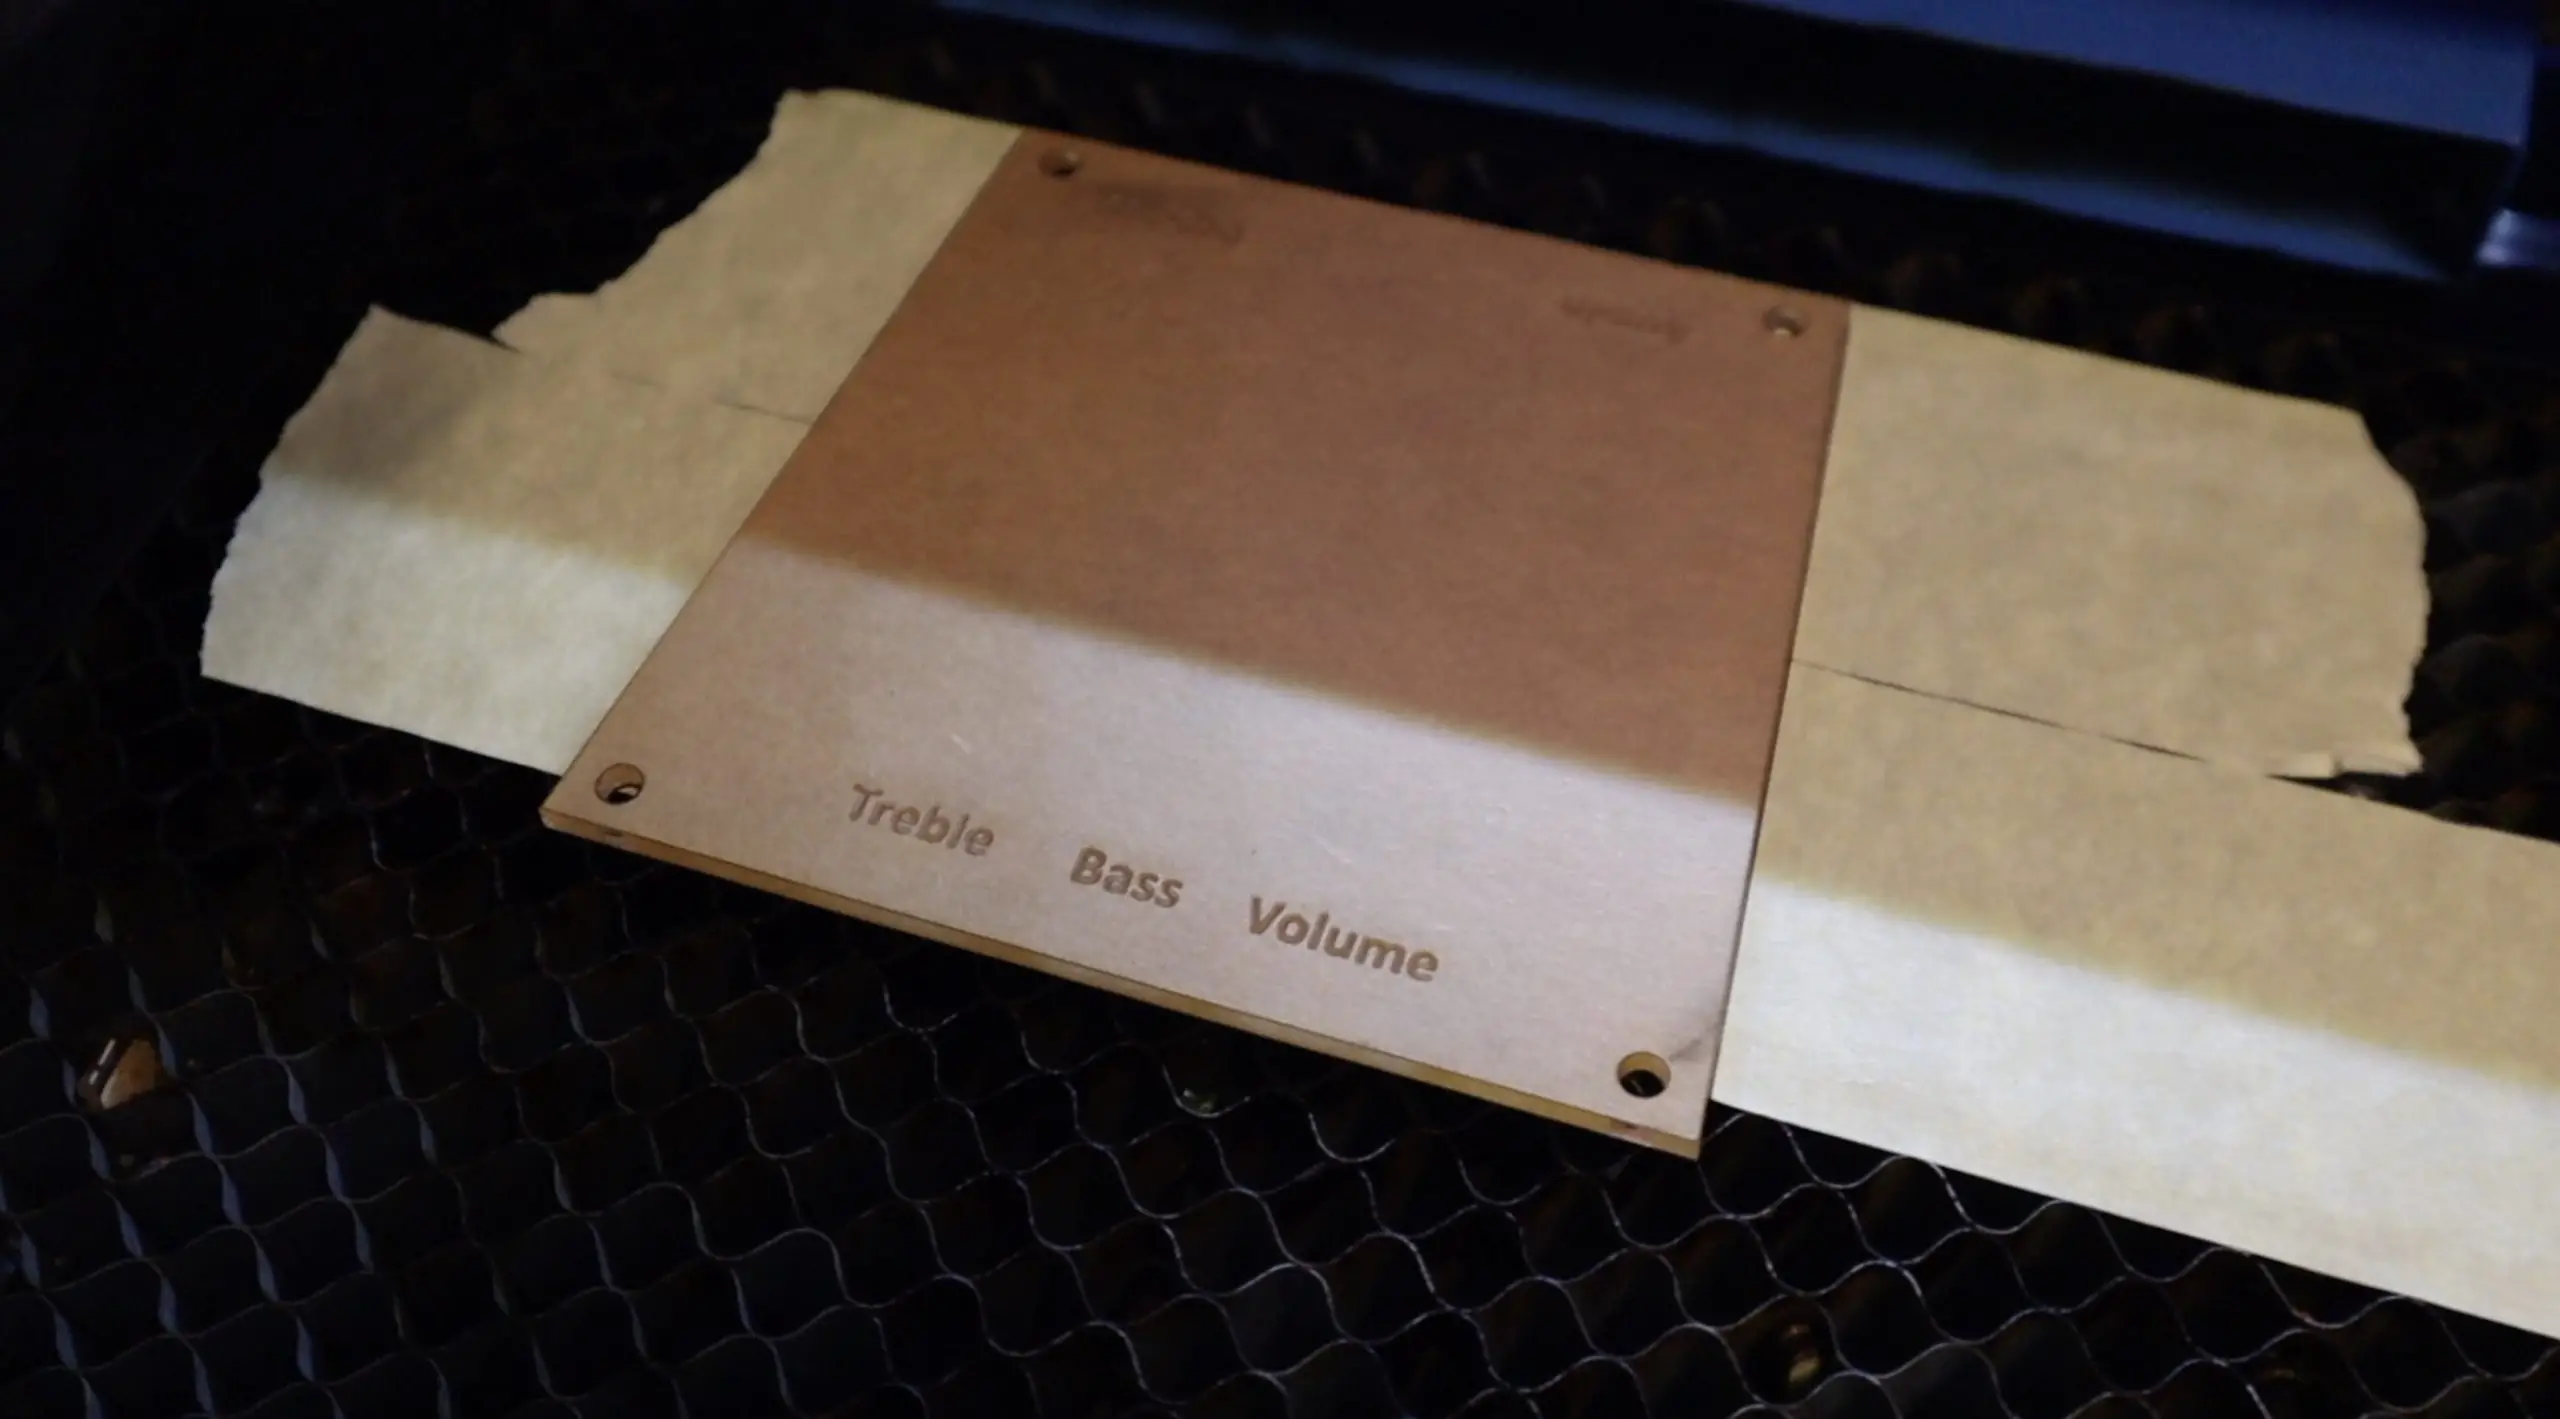 Laser Engraving The Amplifier Cover